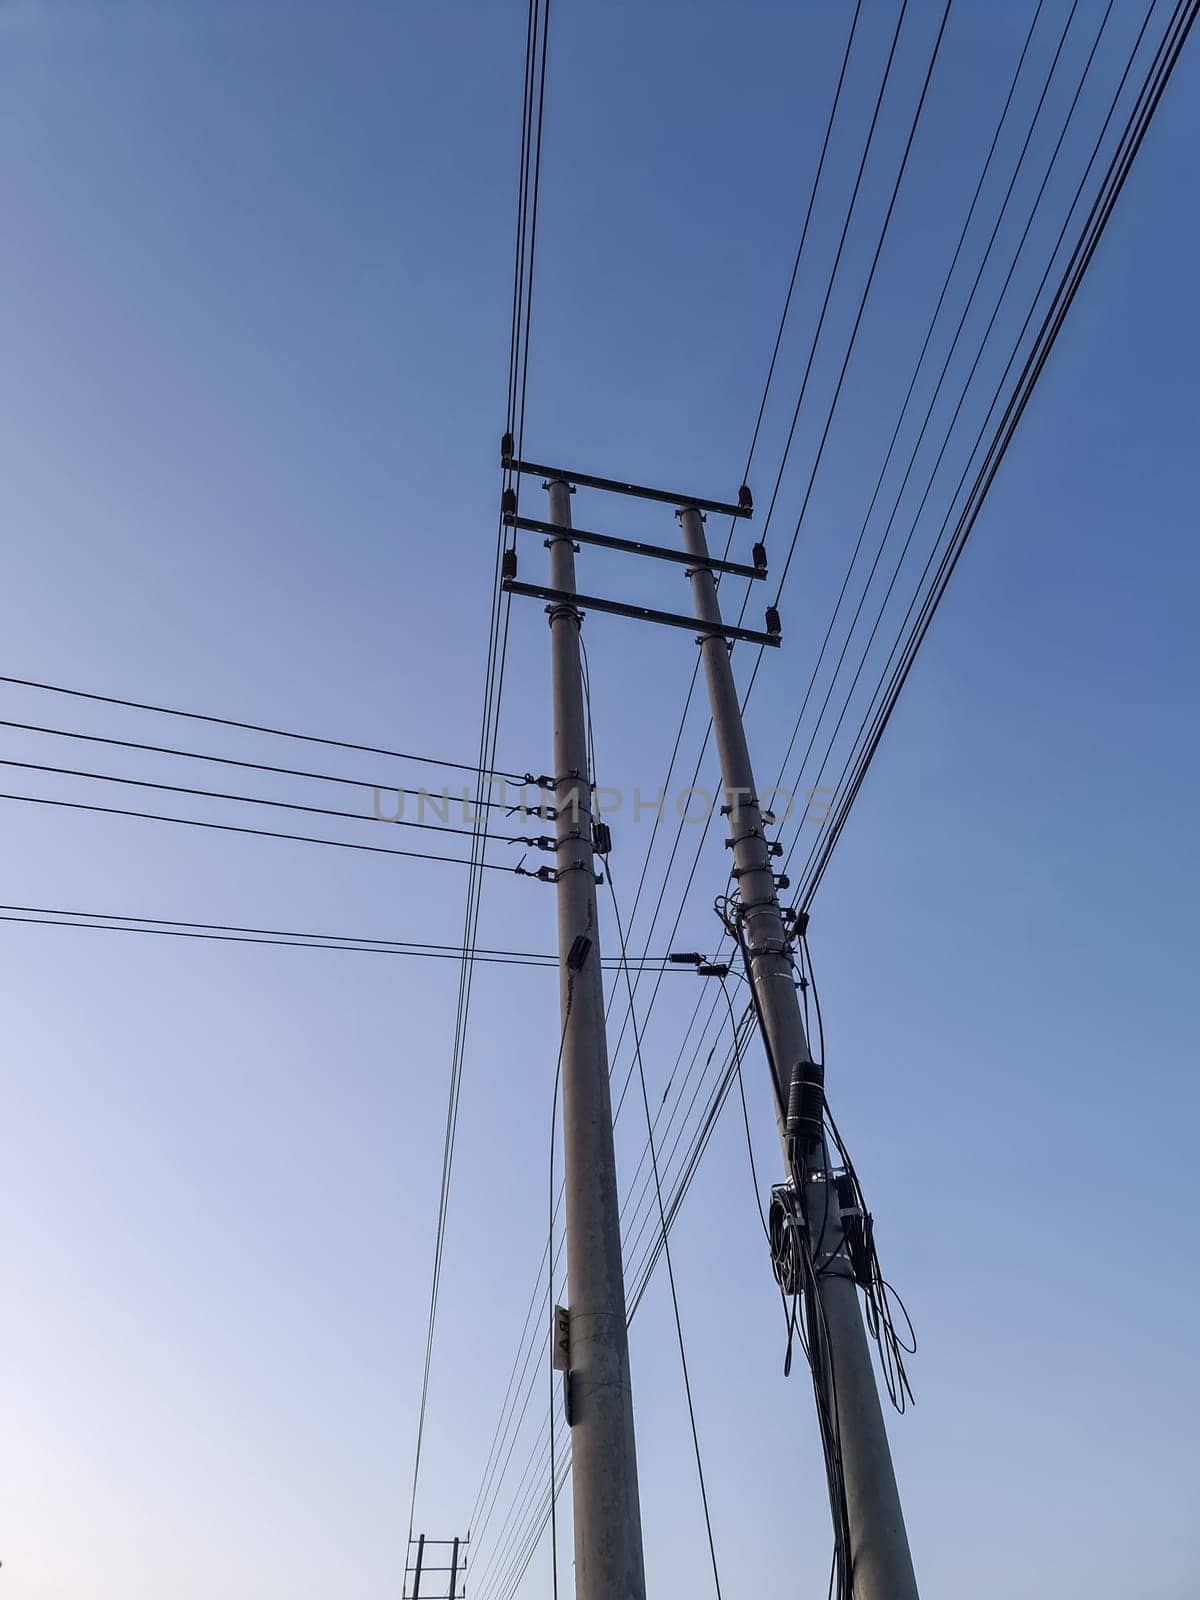 Wildly attached power cables to a power pole with a blue sky by MP_foto71